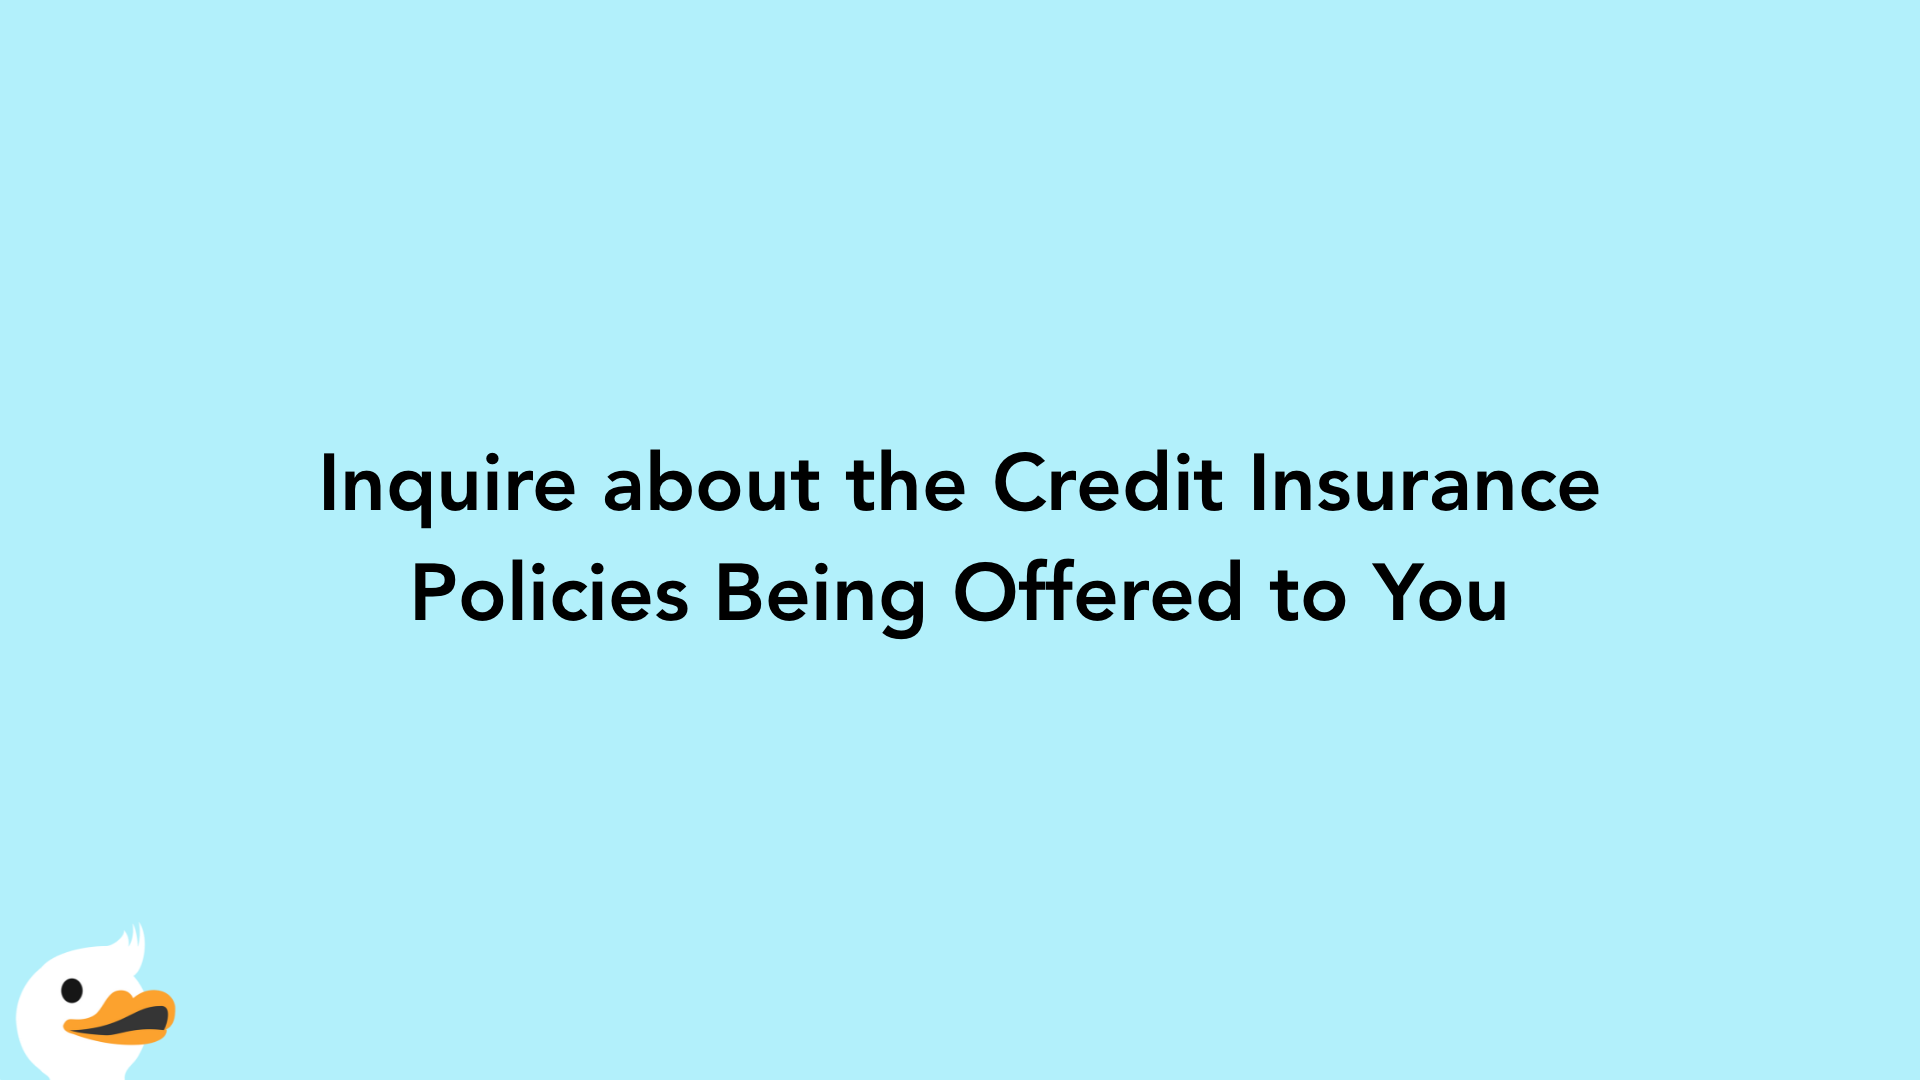 Inquire about the Credit Insurance Policies Being Offered to You